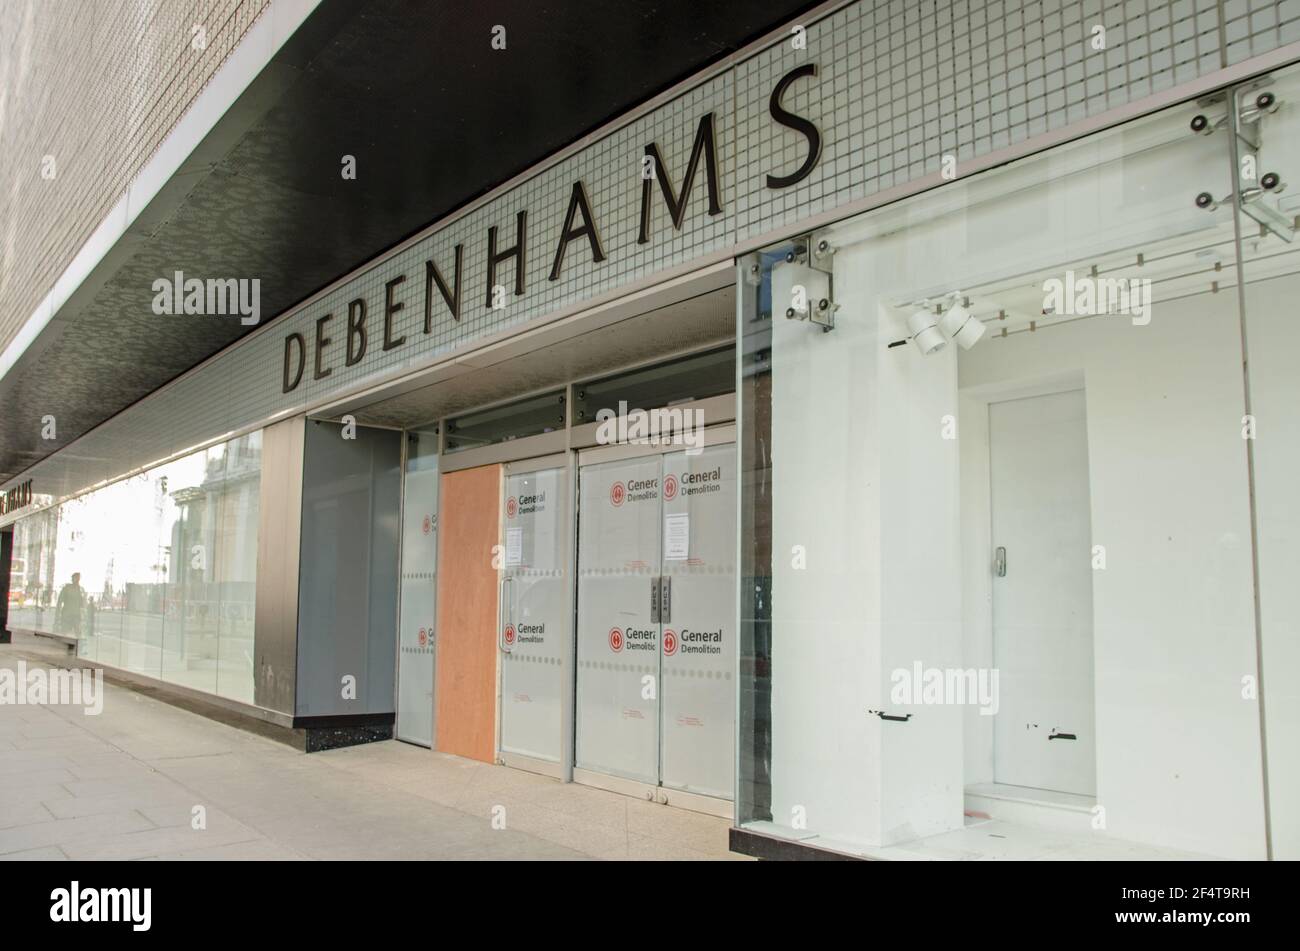 London, UK - February 26, 2021:  Boarded up entrance to the former flagship branch of the Debenhams department store in London's Oxford Street.  The s Stock Photo